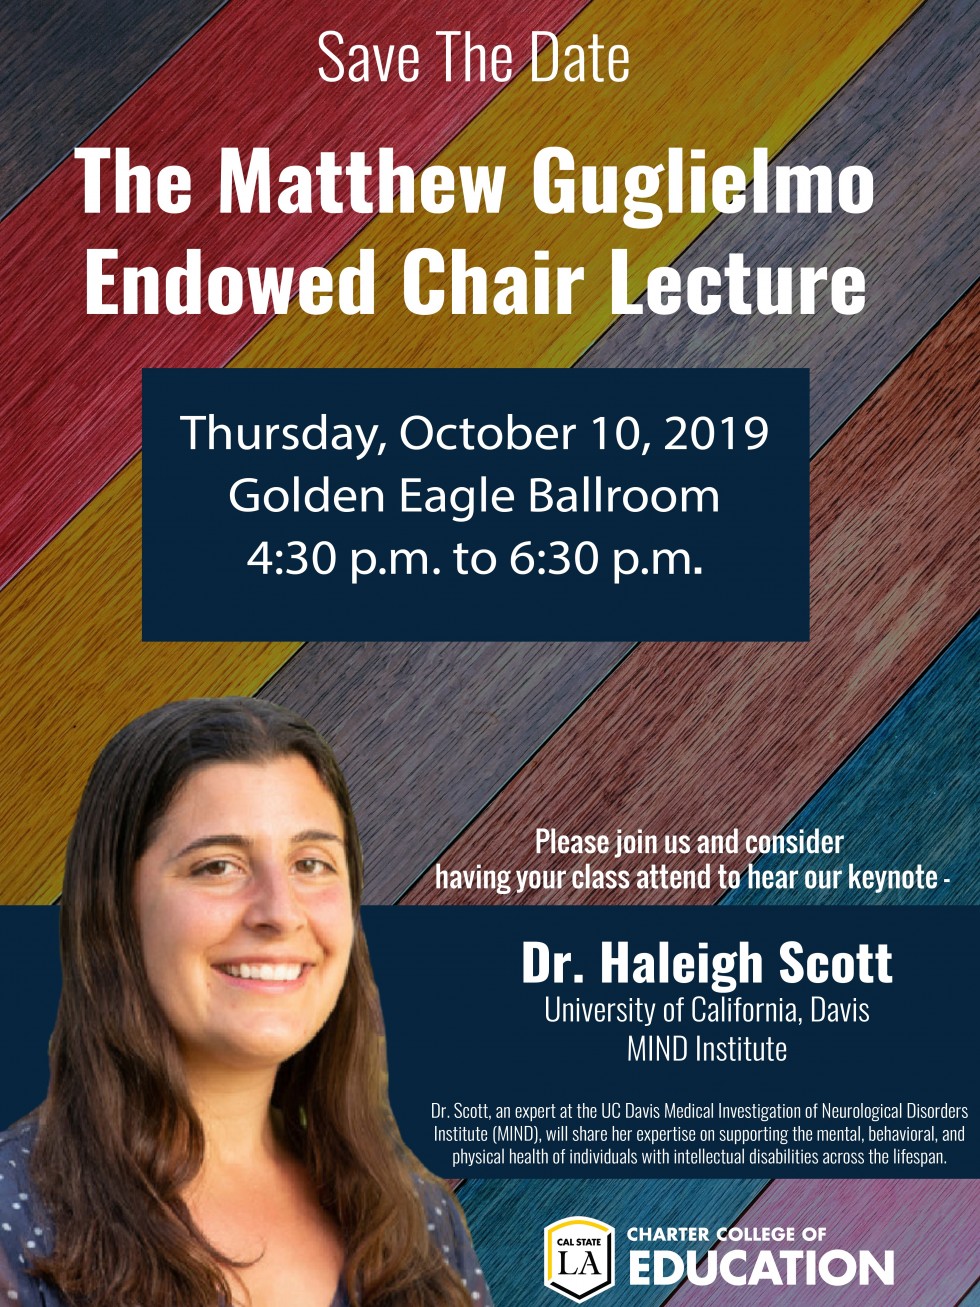 The Metthew Guglielmo Endowed Chair Lecture Event